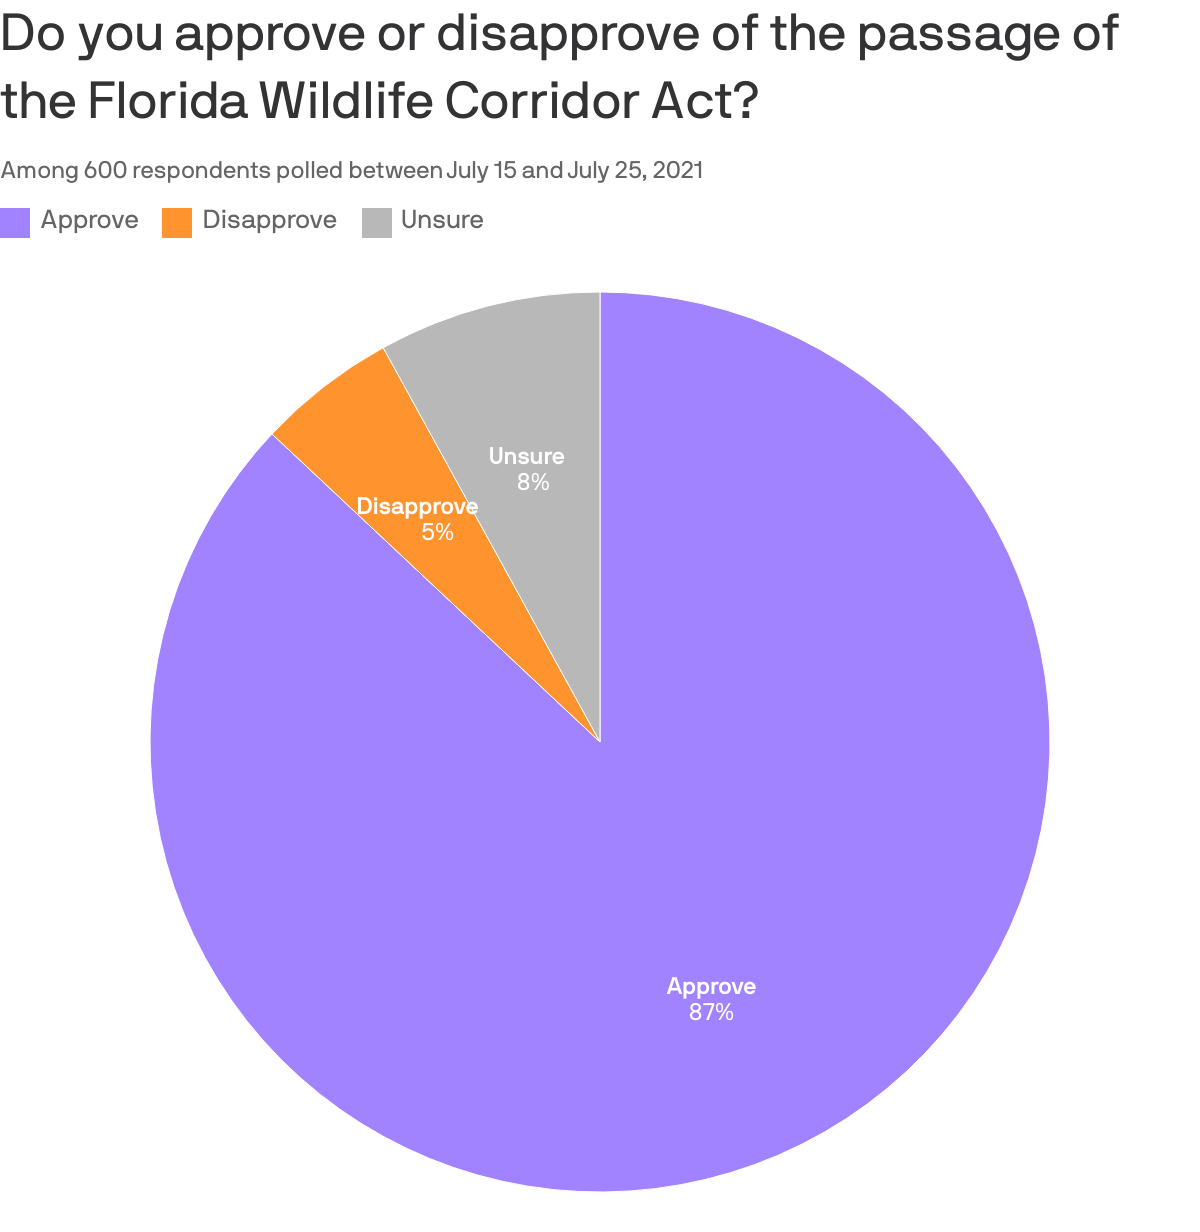 Do you approve or disapprove of the passage of the Florida Wildlife Corridor Act?